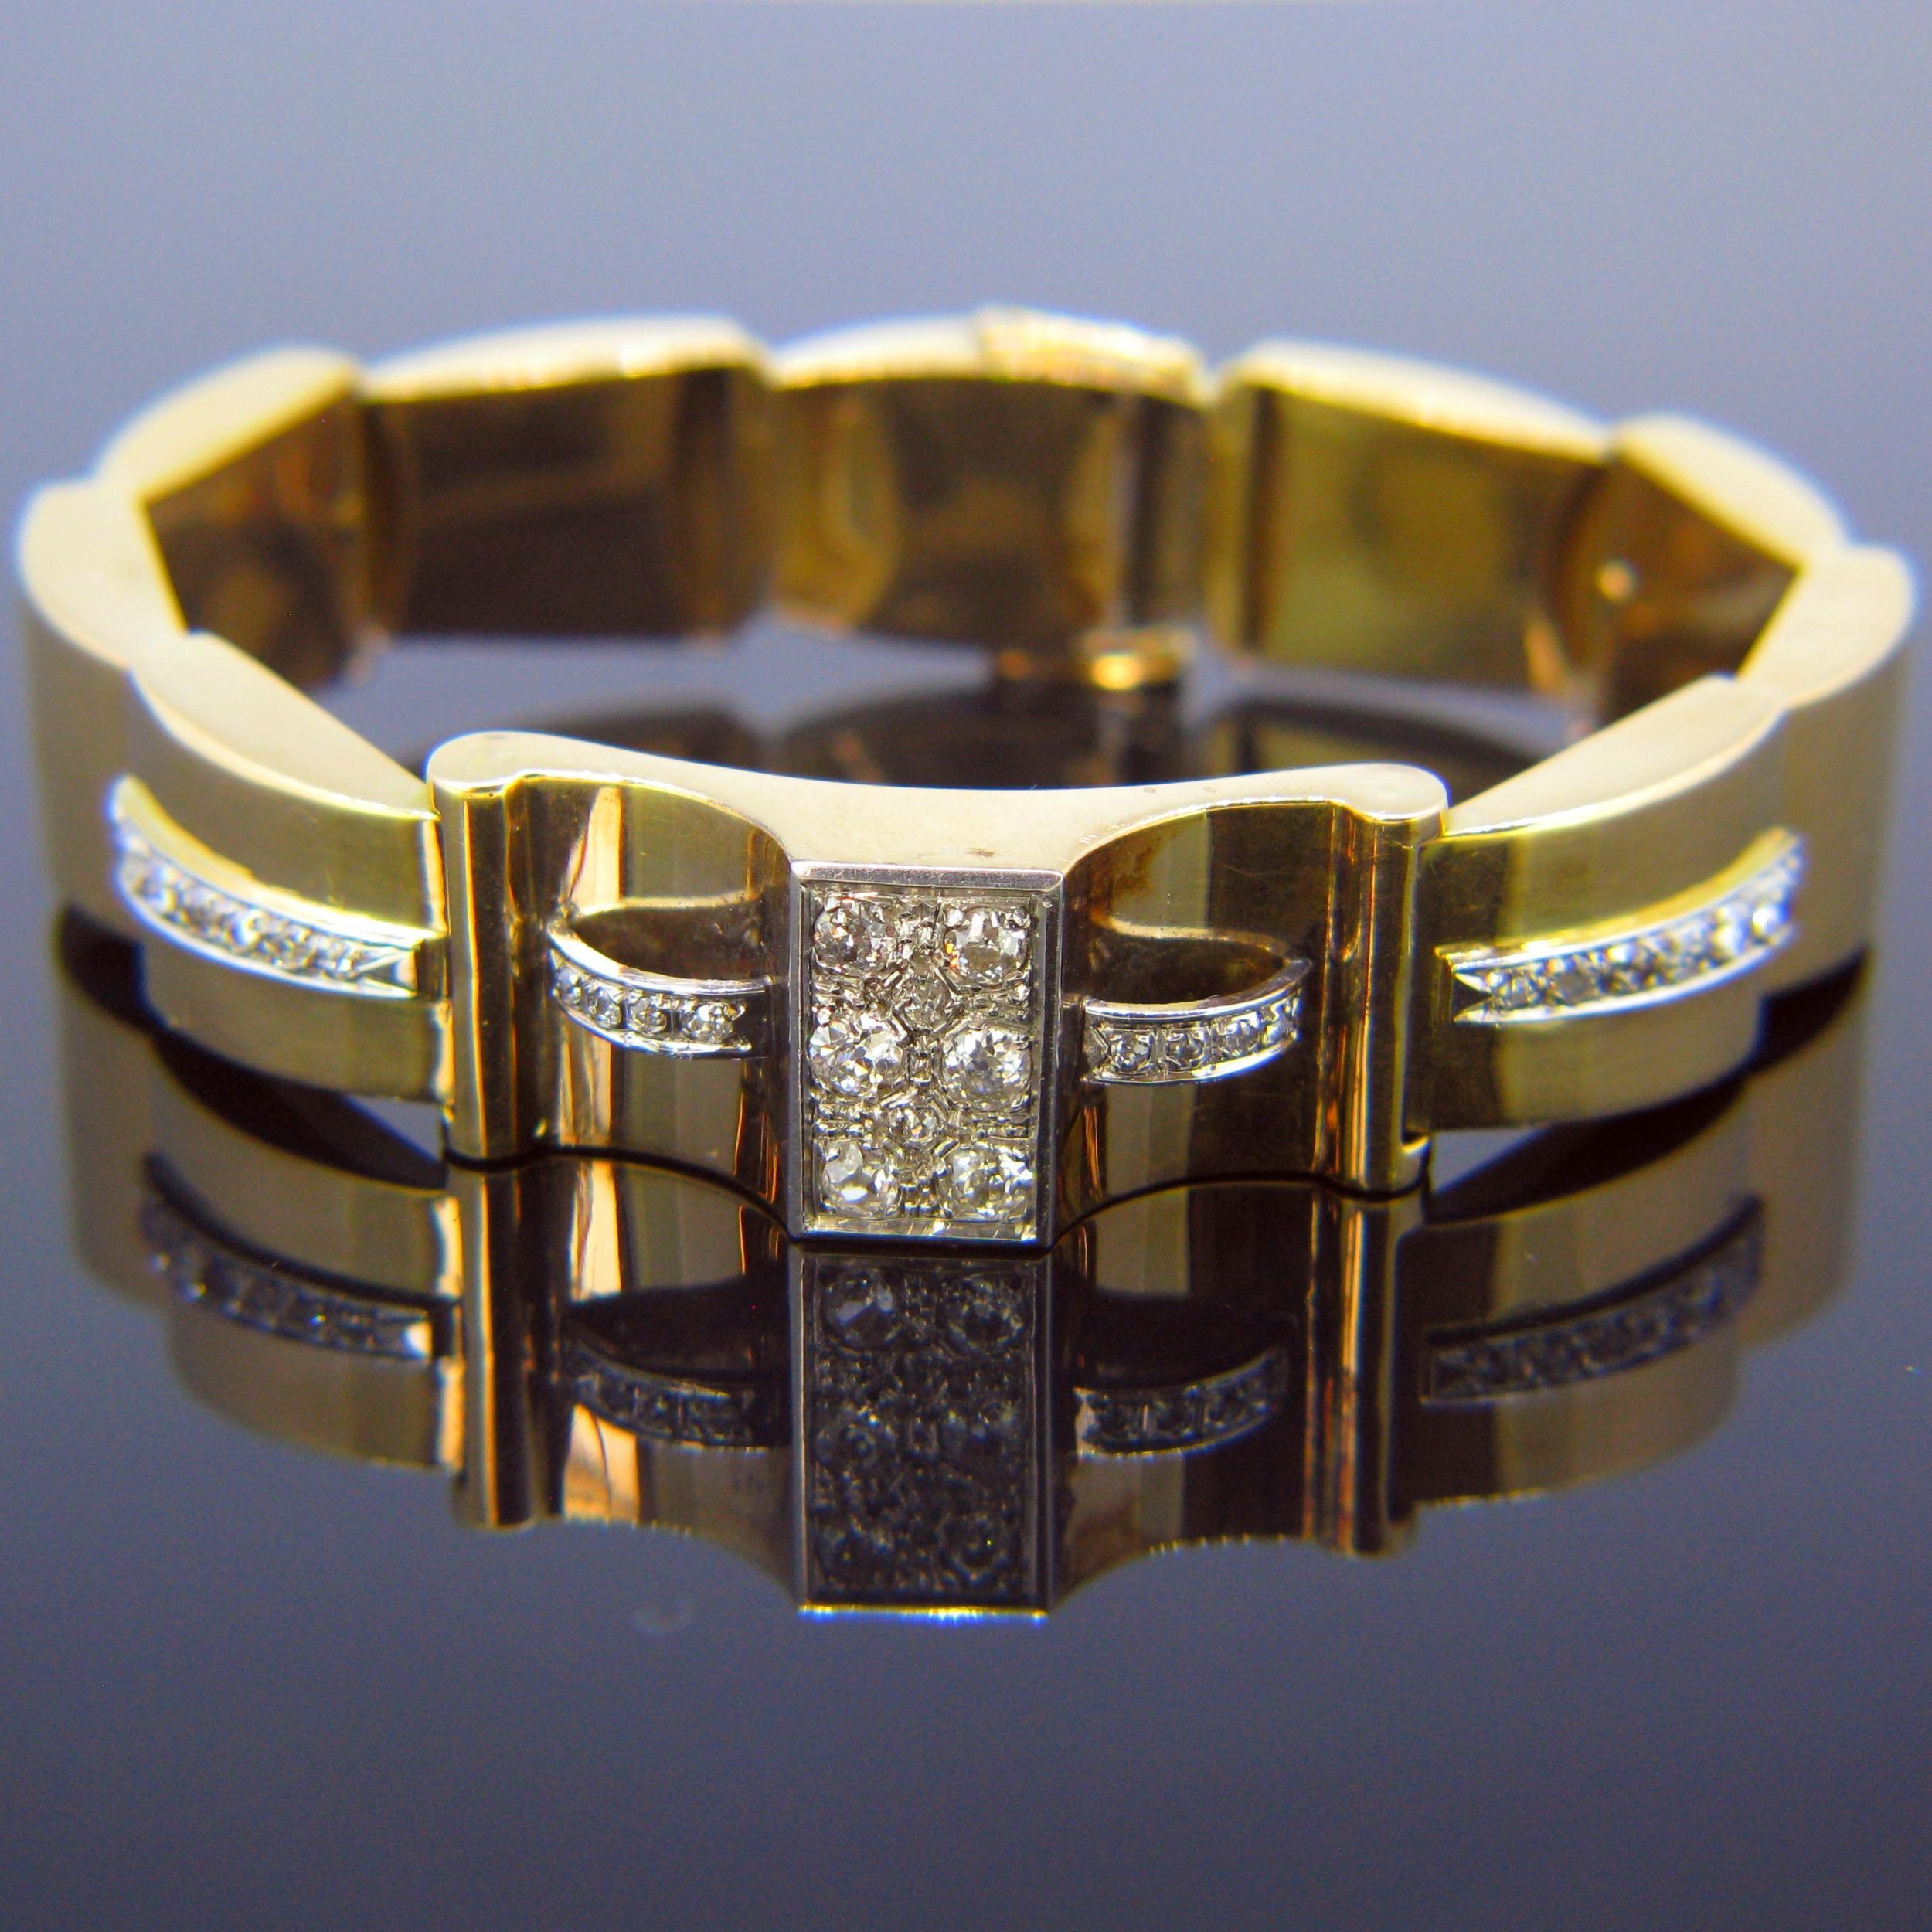 Weight:	50gr

Metal:		18kt yellow gold and platinum

Stones:	28 Diamonds
•	Cut:	Old Mince			
•	Total carat weight: 	1.20ct approximately	
•	Colour:	I/J
•	Clarity:	SI

Condition:	Good

Hallmarks:	French, eagle’s head

Comments:	This bracelet from the